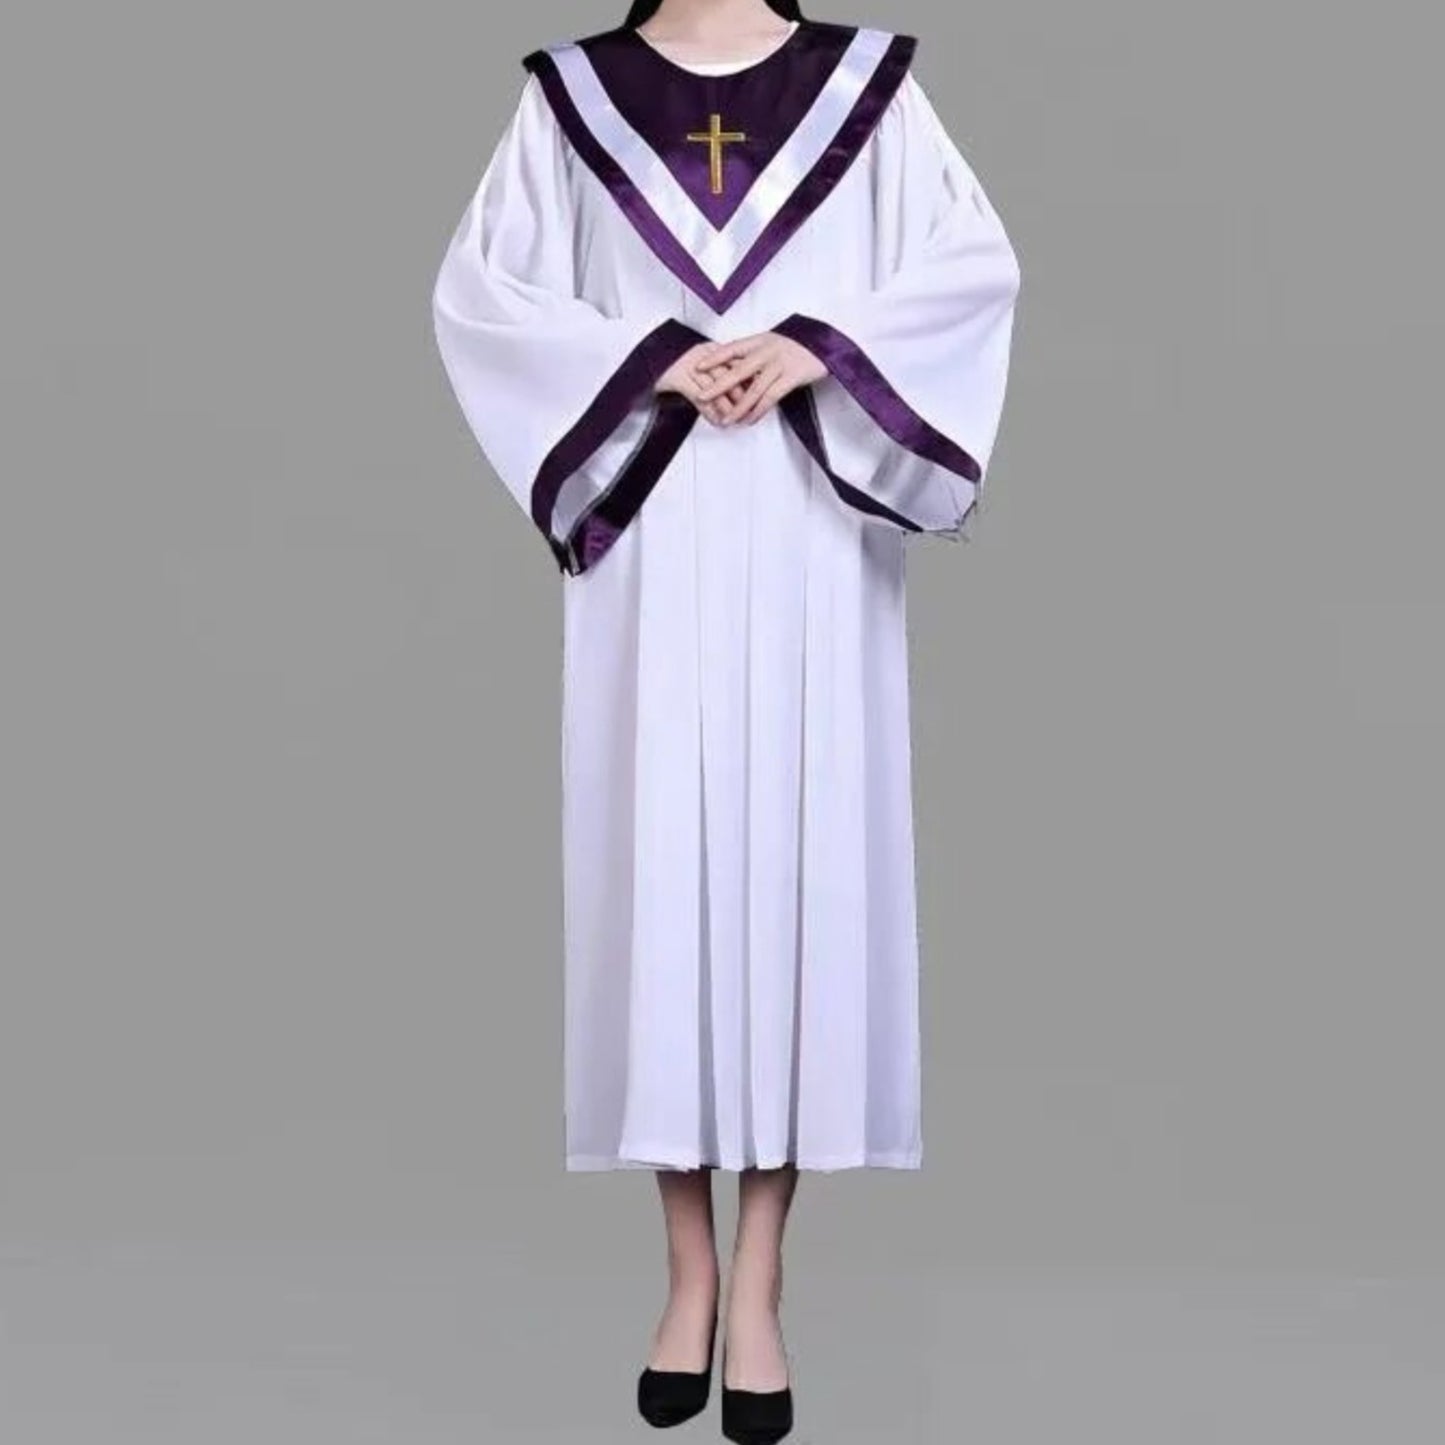 Christian Church Choir Robes Multi-Style - Egplant - Solid Cuff, In God's Service store